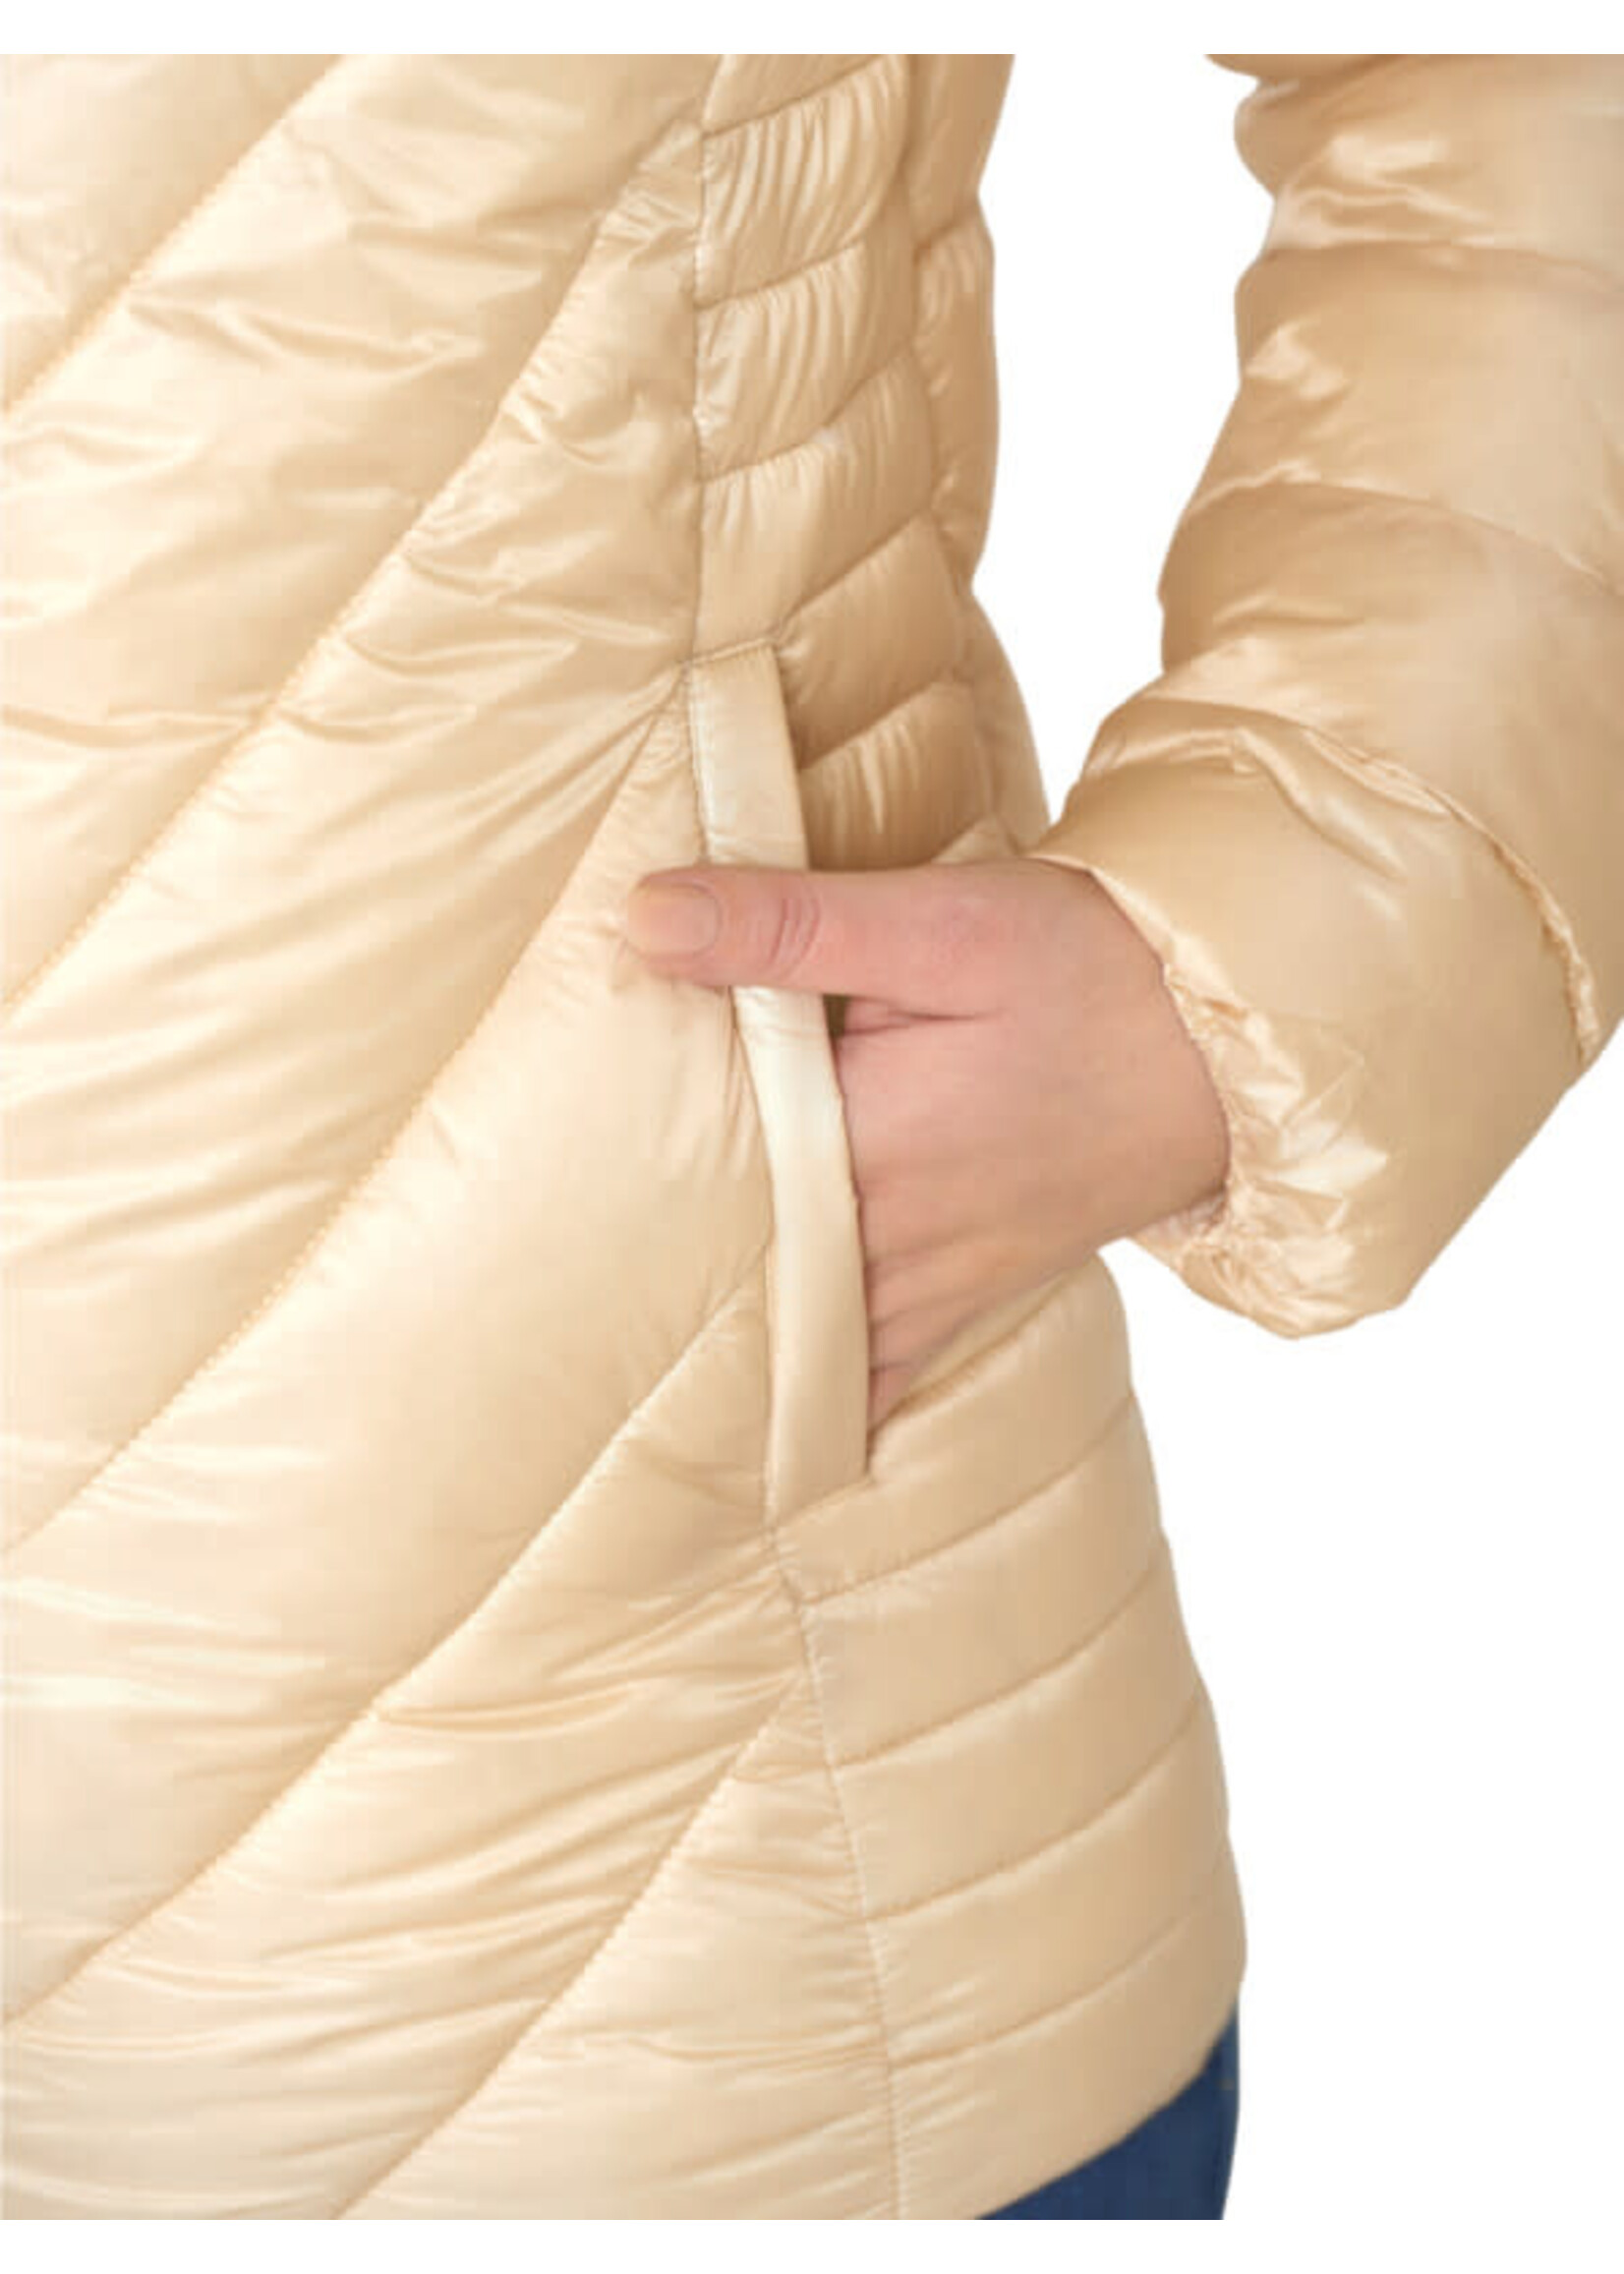 Ciso Jacket padded bleached sand